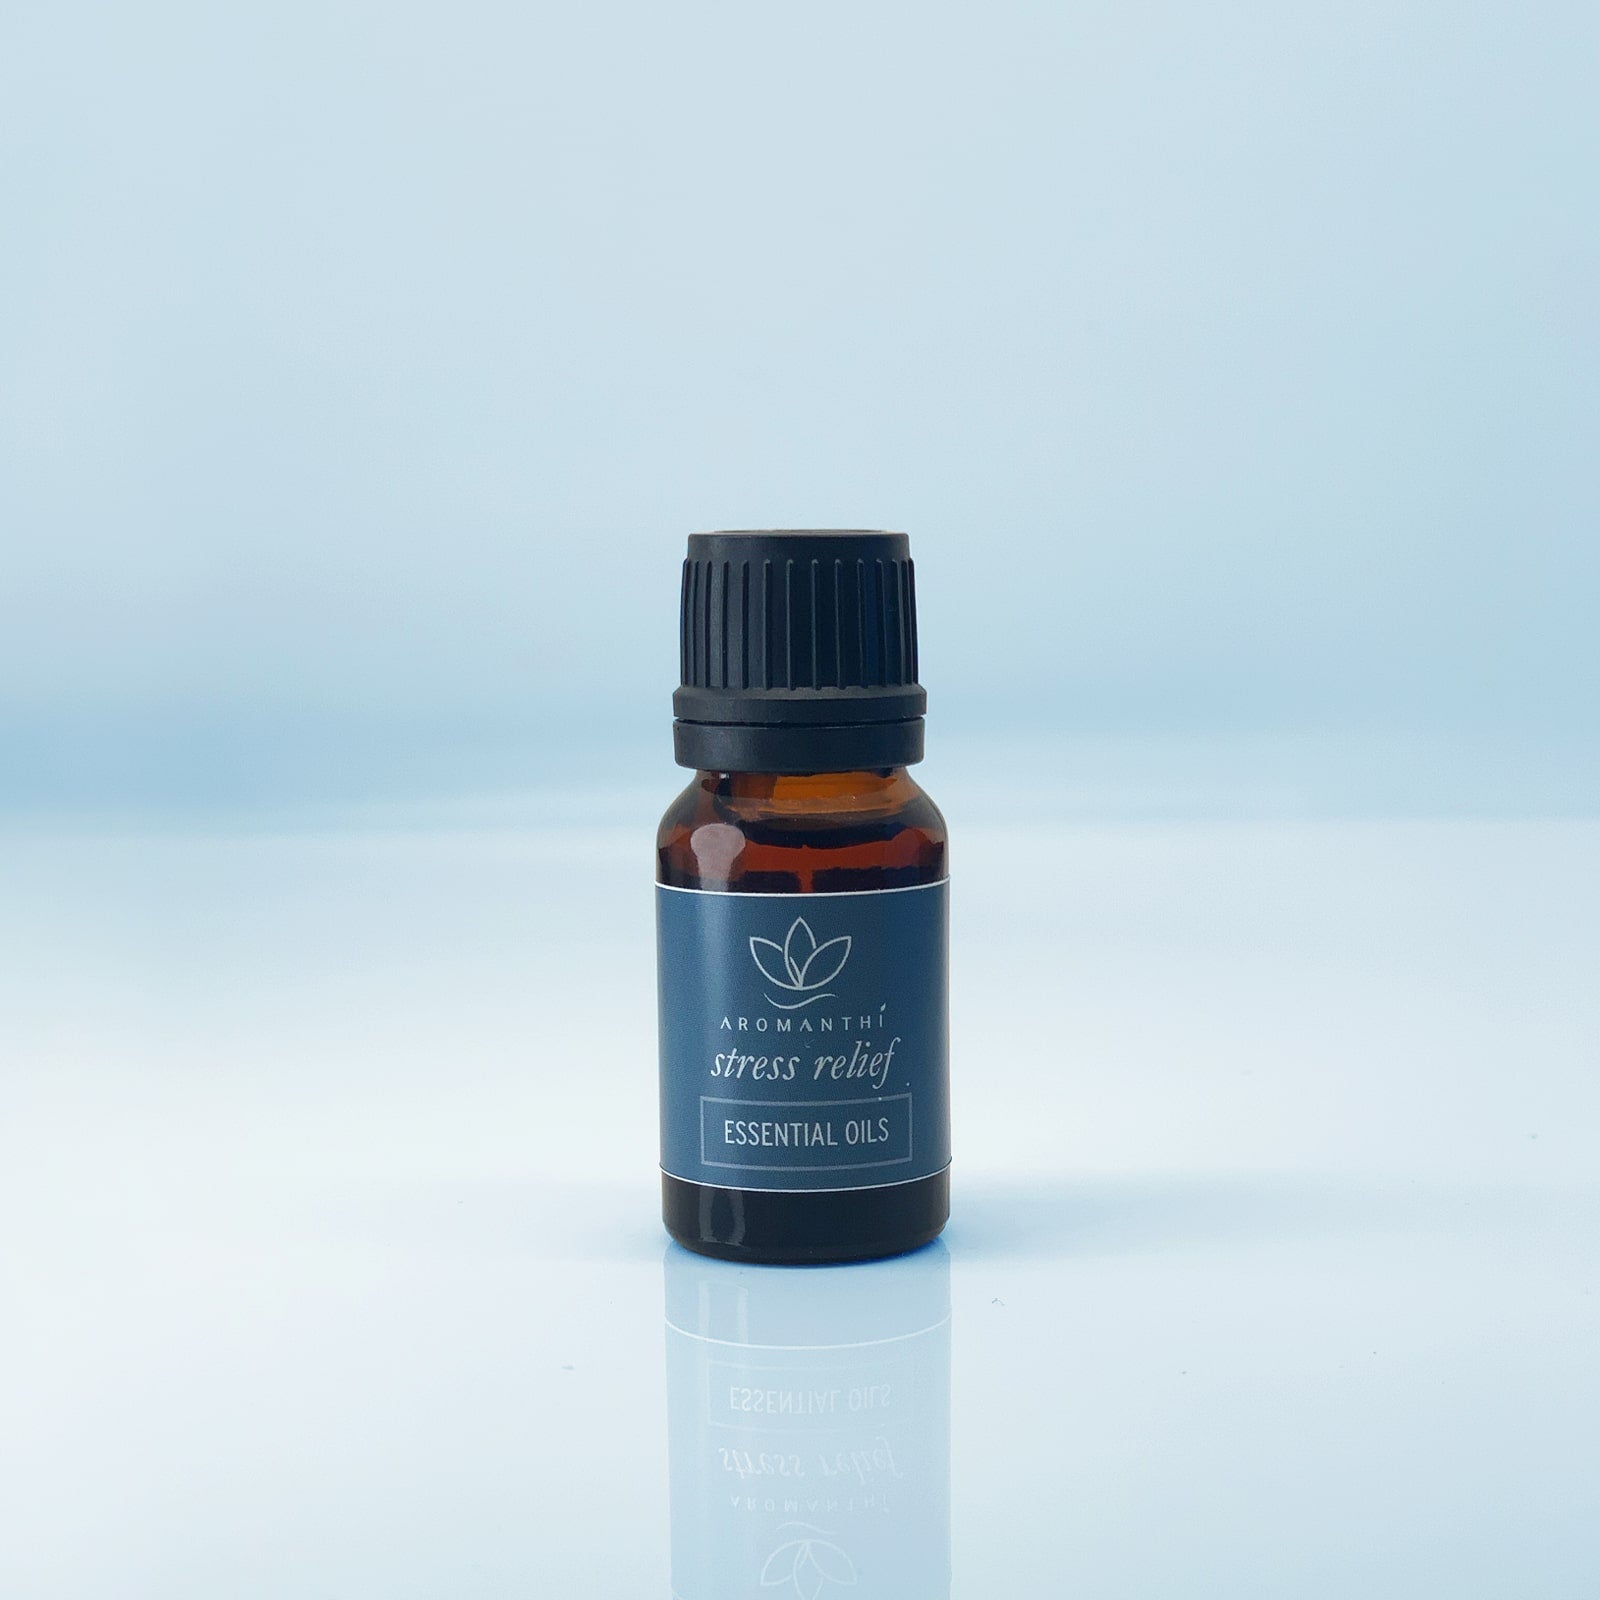 Stress Relief Essential Oil Blend 10ml - Aromanthi. Shop aromatherapy and essential oils for stress. Aromanthi Stress Relief blend allows you to enjoy natural therapeutic benefit of lavender, pine, patchouli and clary sage oils. Add with therapeutic massage and apply to pressure points. Create a zen room by diffusing essential oils, steam shower, moisturizer or shampoo